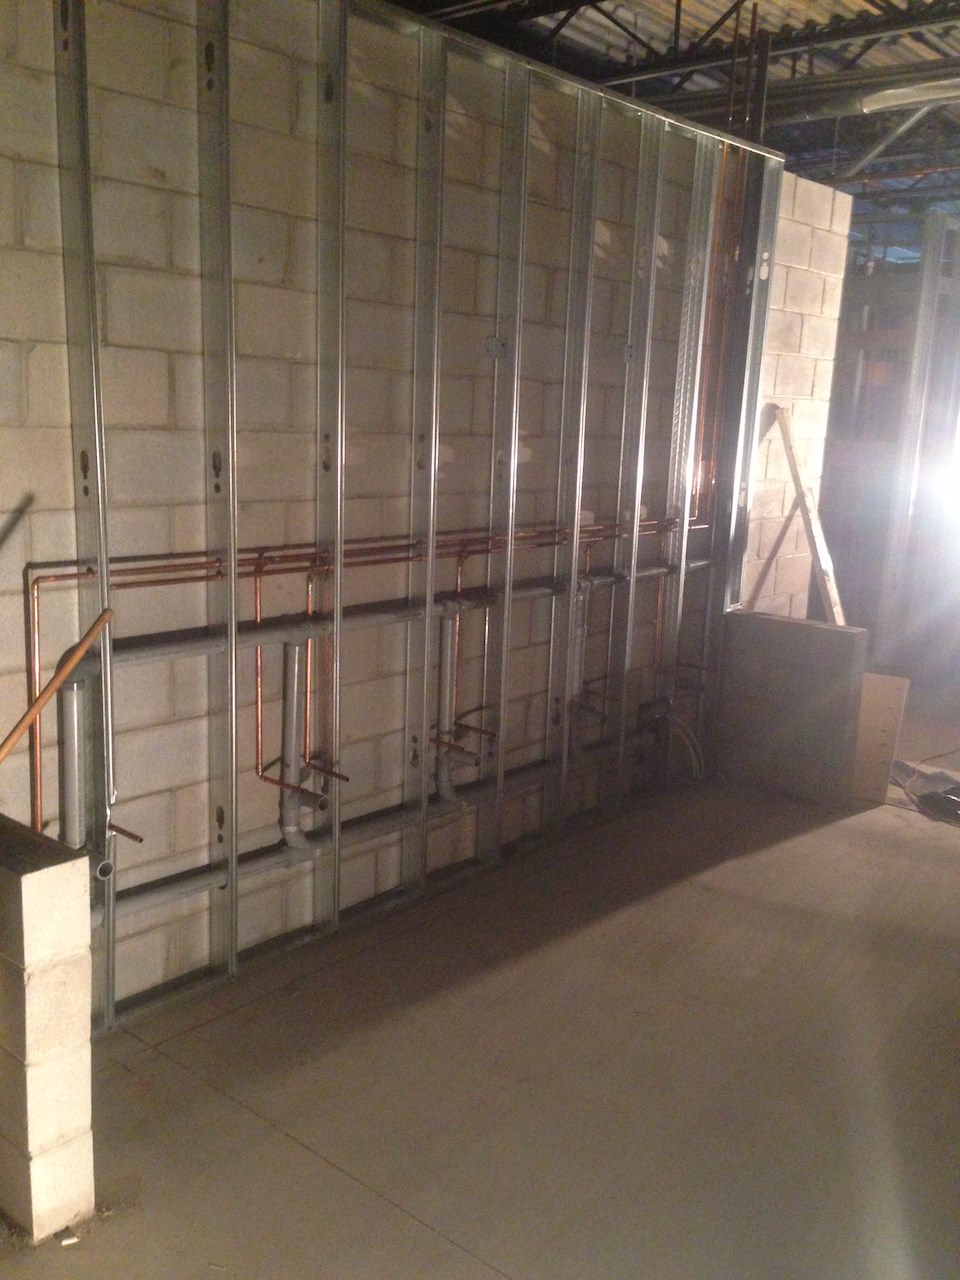 Copper pipes behind wall